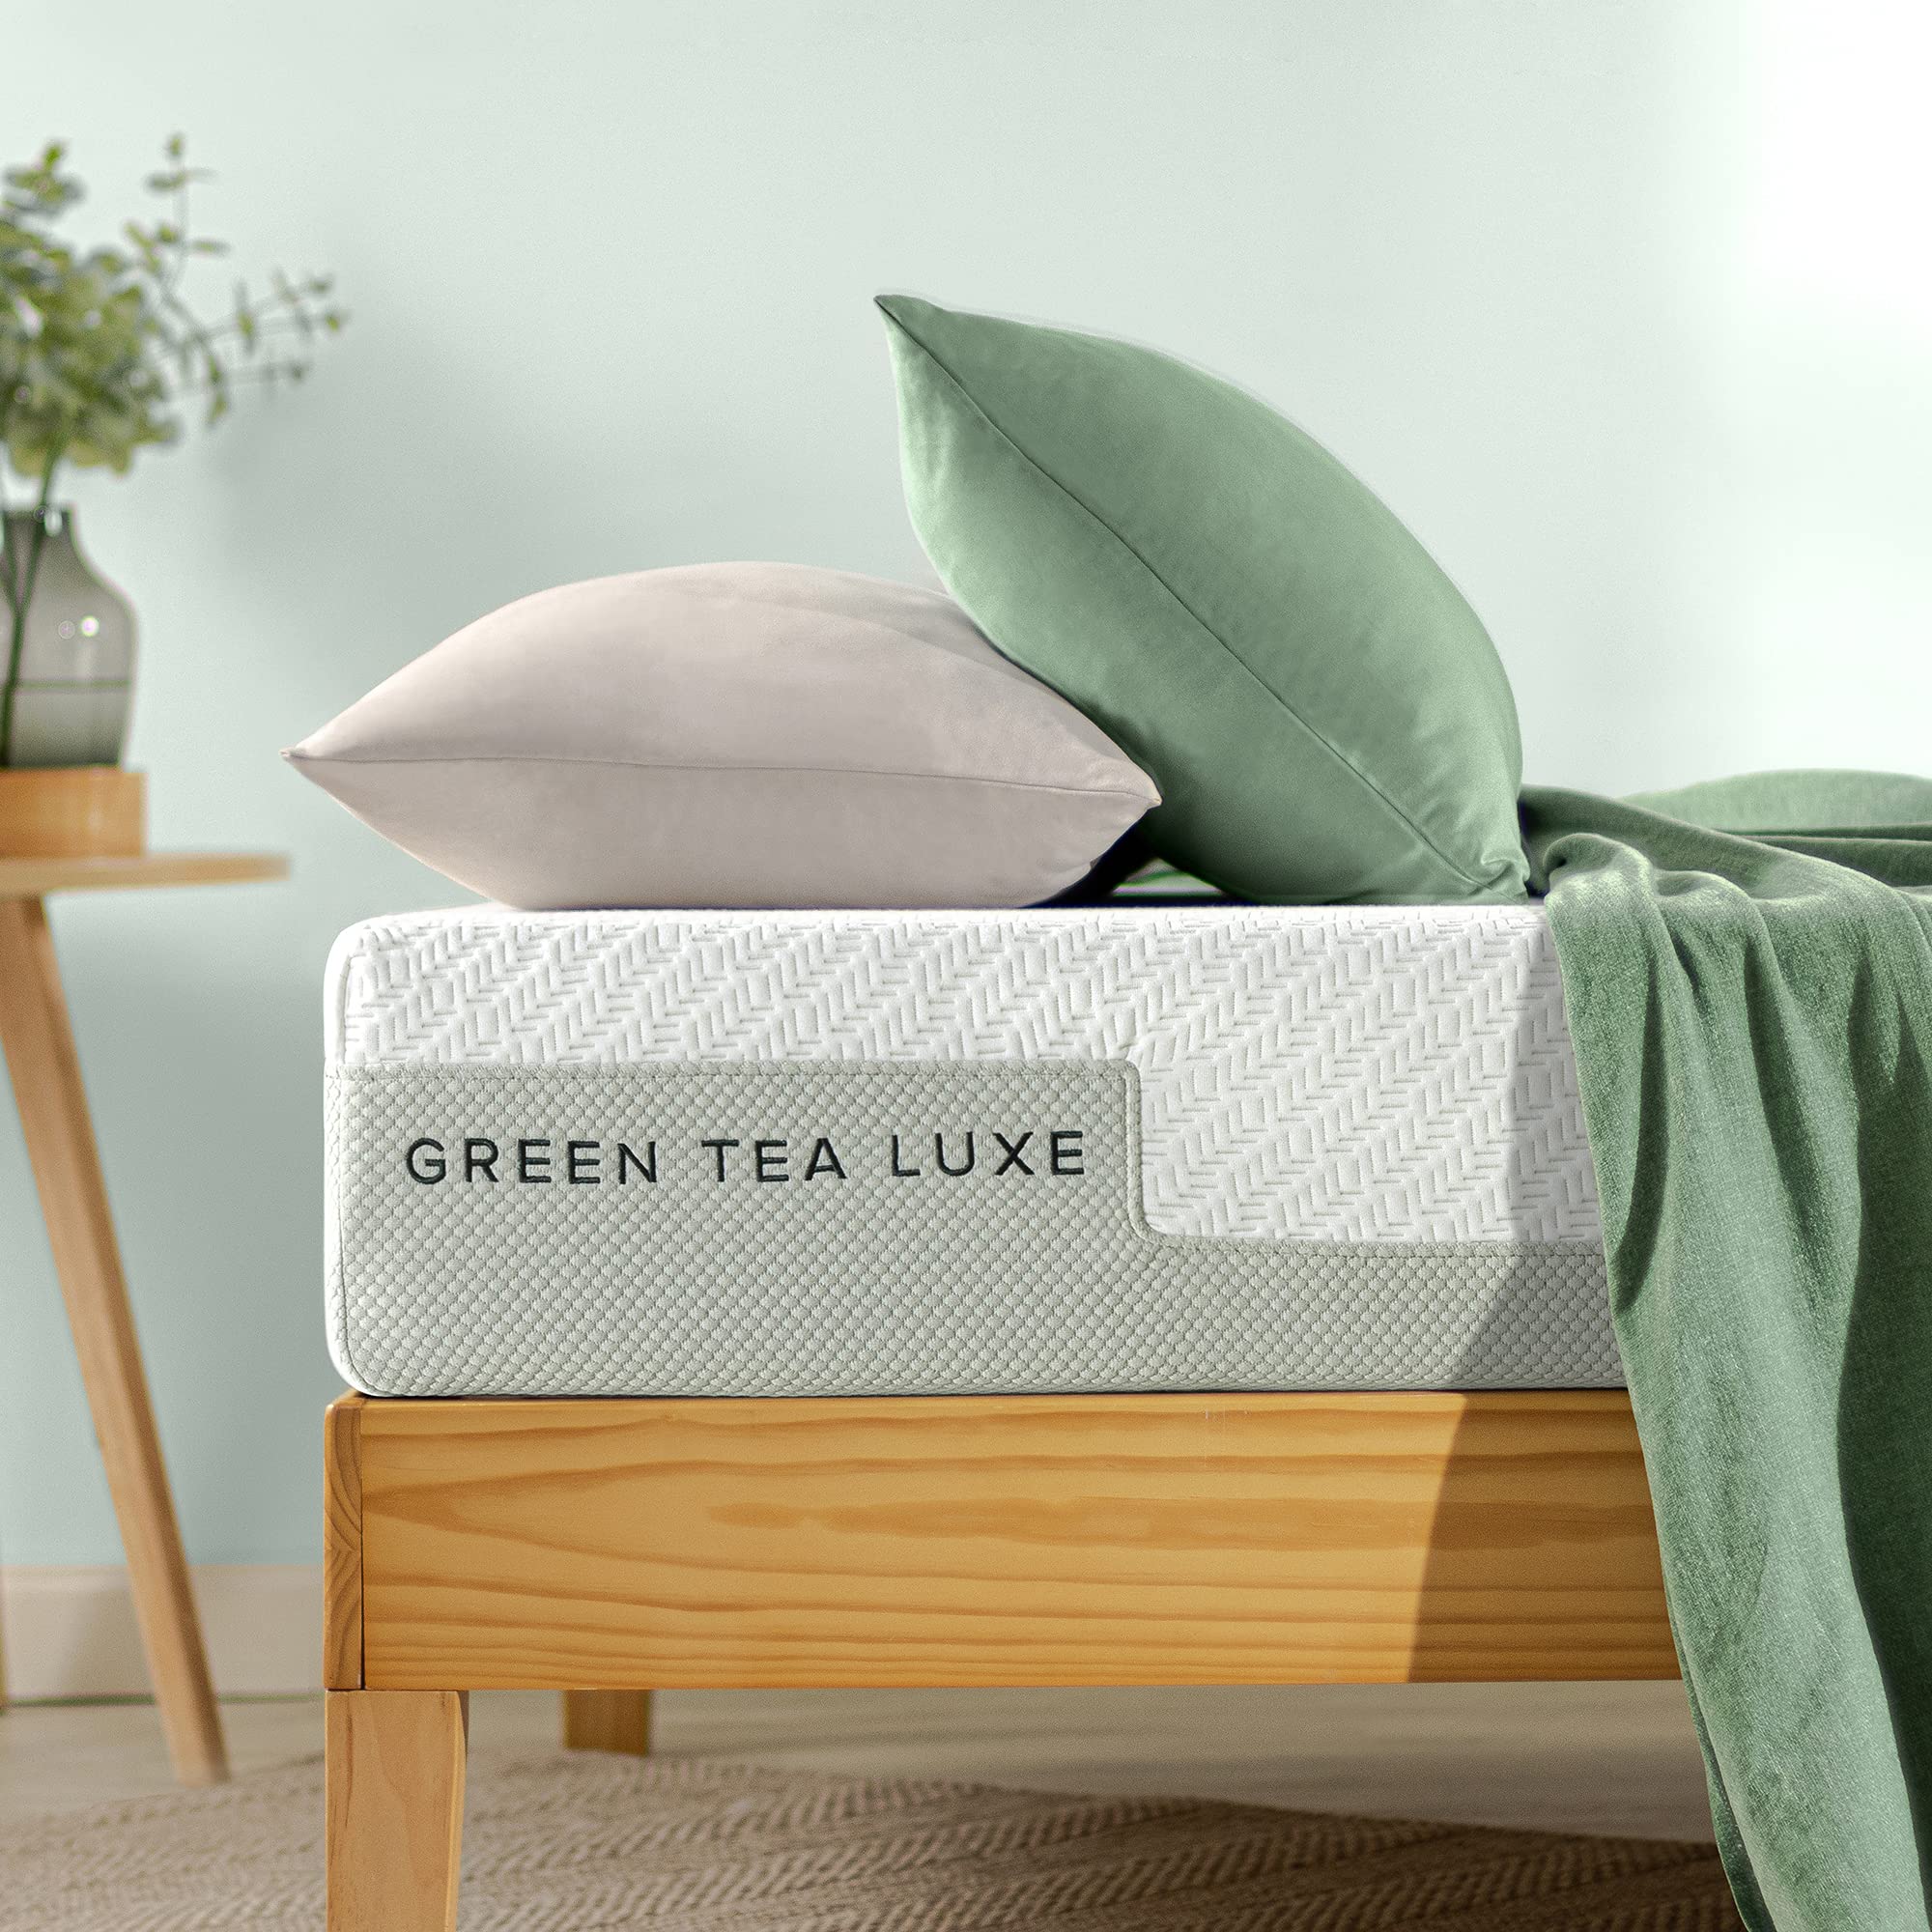 Amazon.com: ZINUS 8 Inch Green Tea Luxe Memory Foam Mattress / Pressure Relieving / CertiPUR-US Certified / Bed-in-a-Box / All-New / Made in USA, King $149